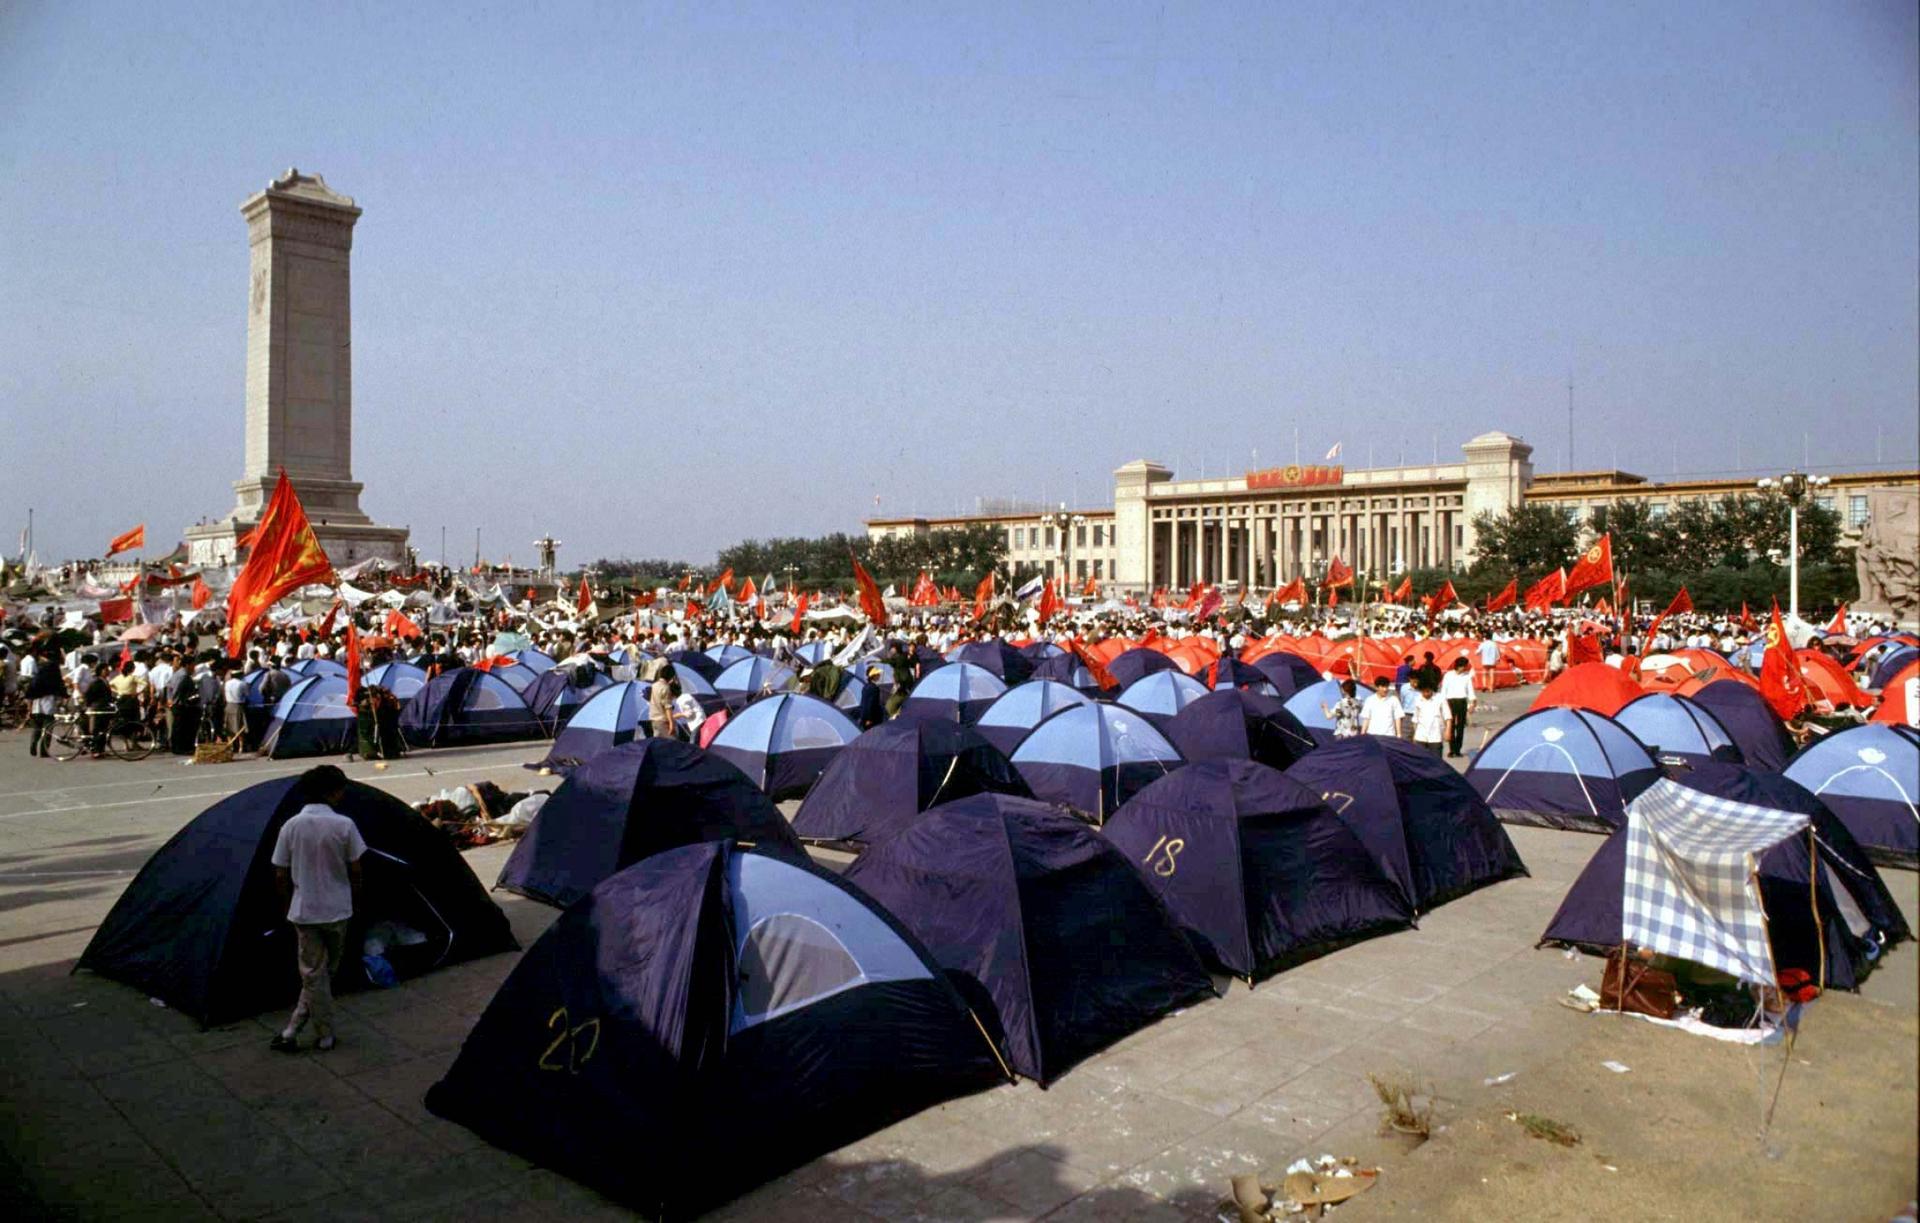 Tents fill up Tiananmen Square.